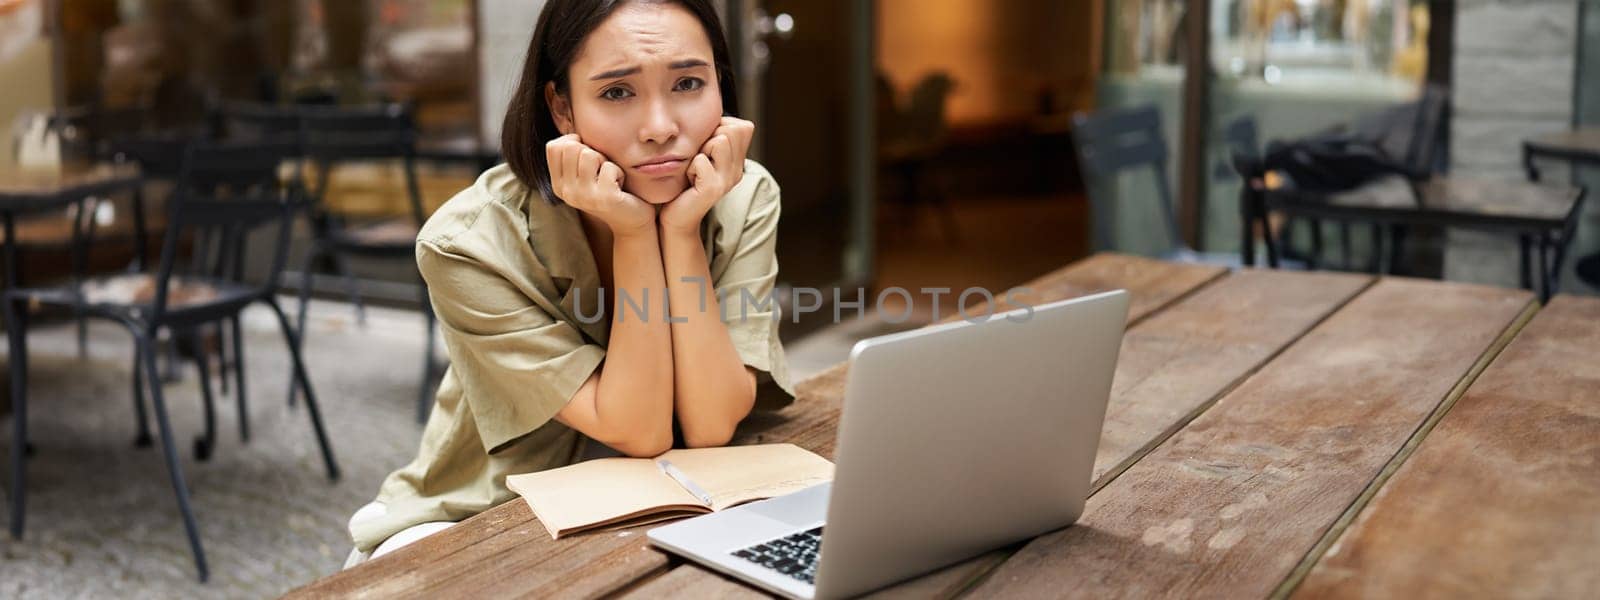 Bored girl looks at her laptop, sits outdoors in cafe, listening boring online meeting, working and feeling sad.